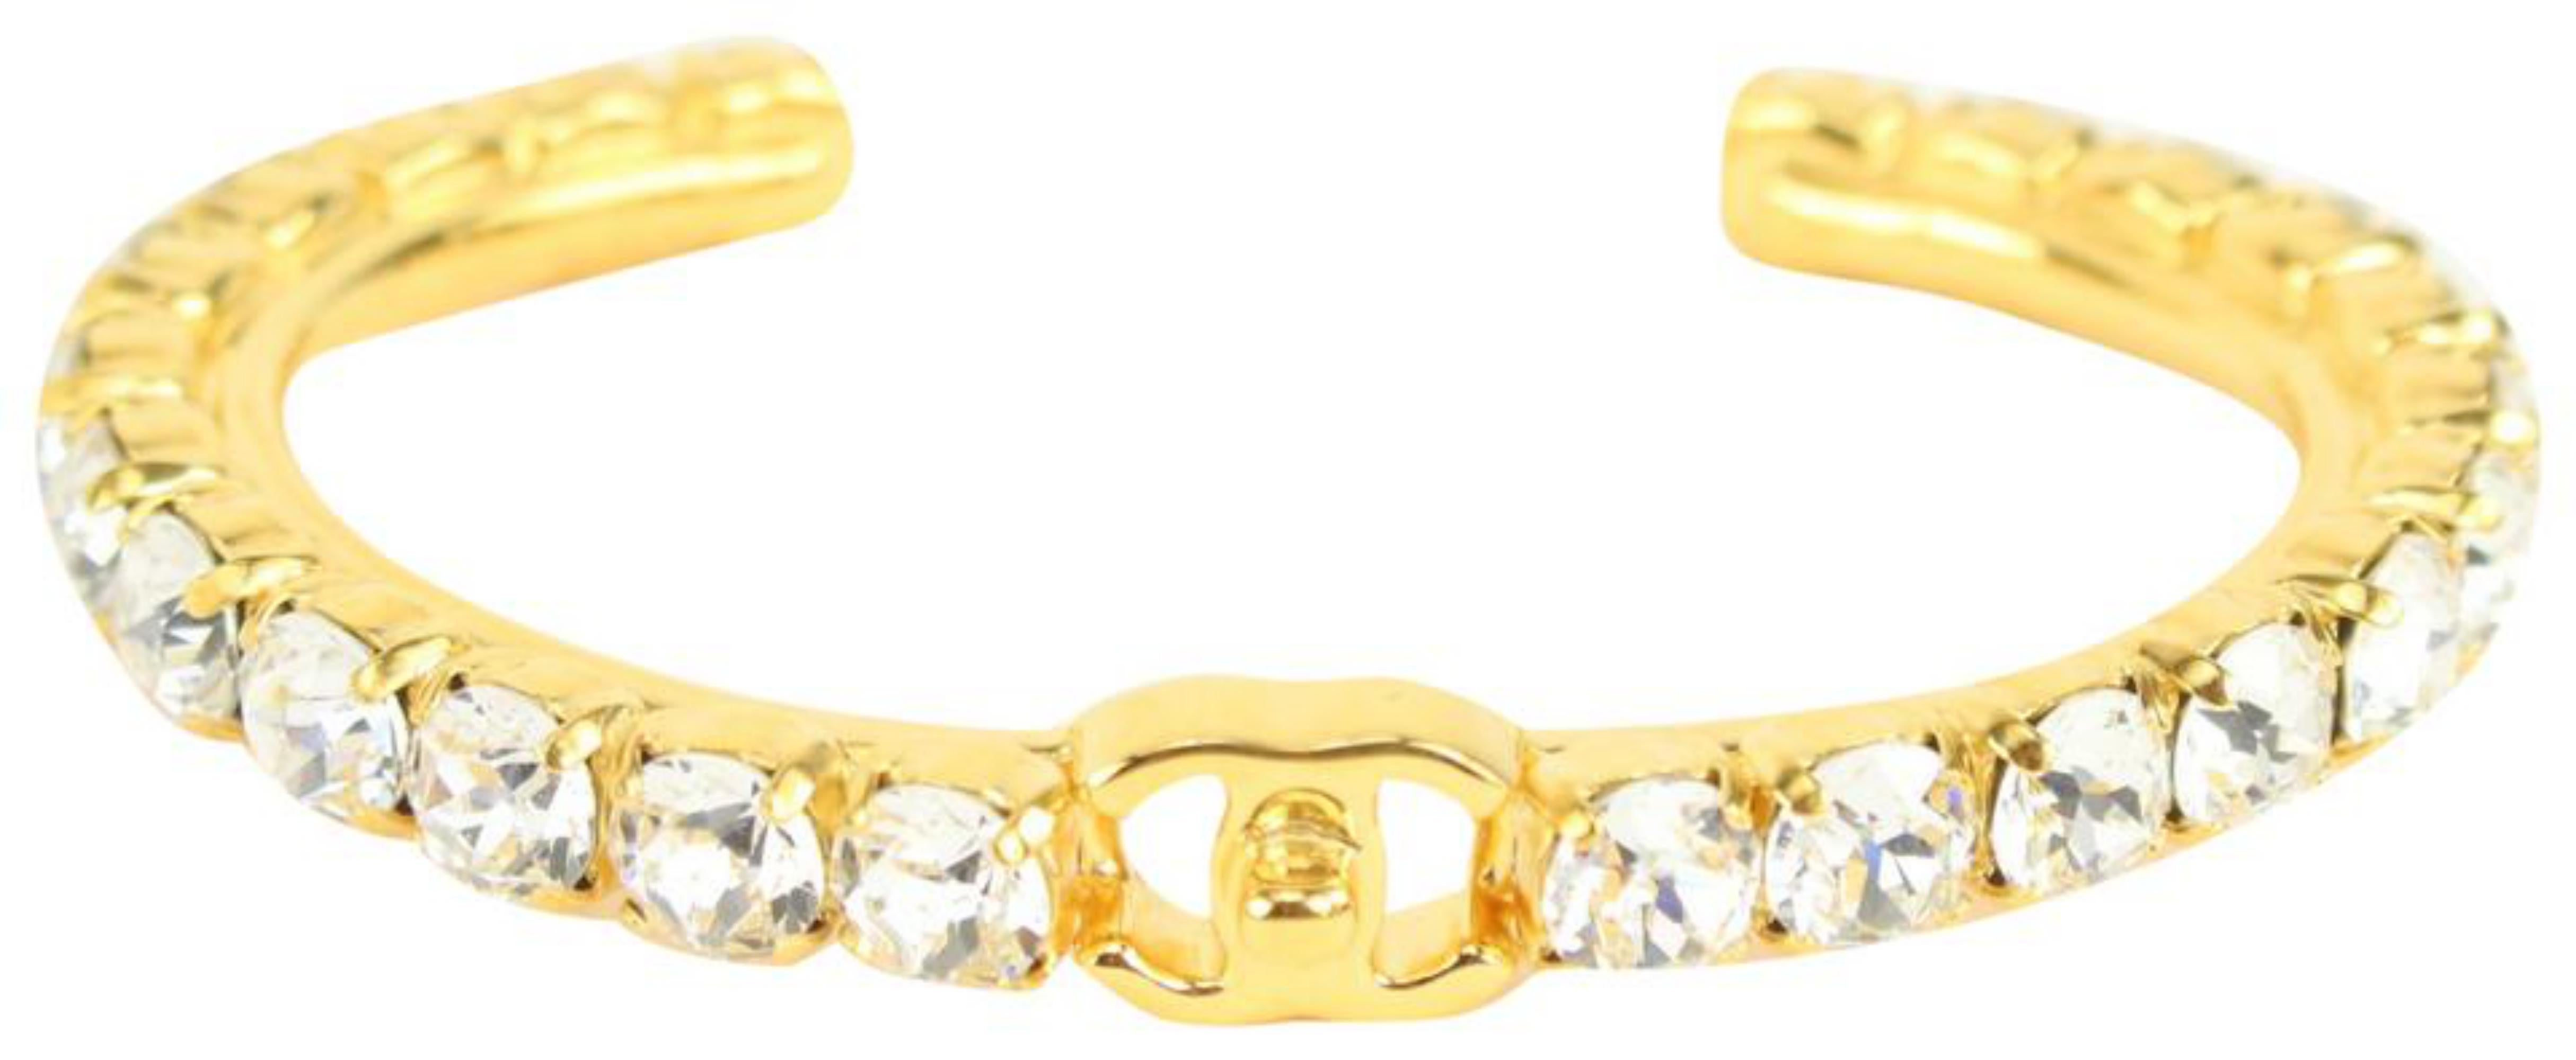 Chanel B20A Gold Crystal More is More CC Turnlock Bangle Bracelet Cuff 1118c6 5